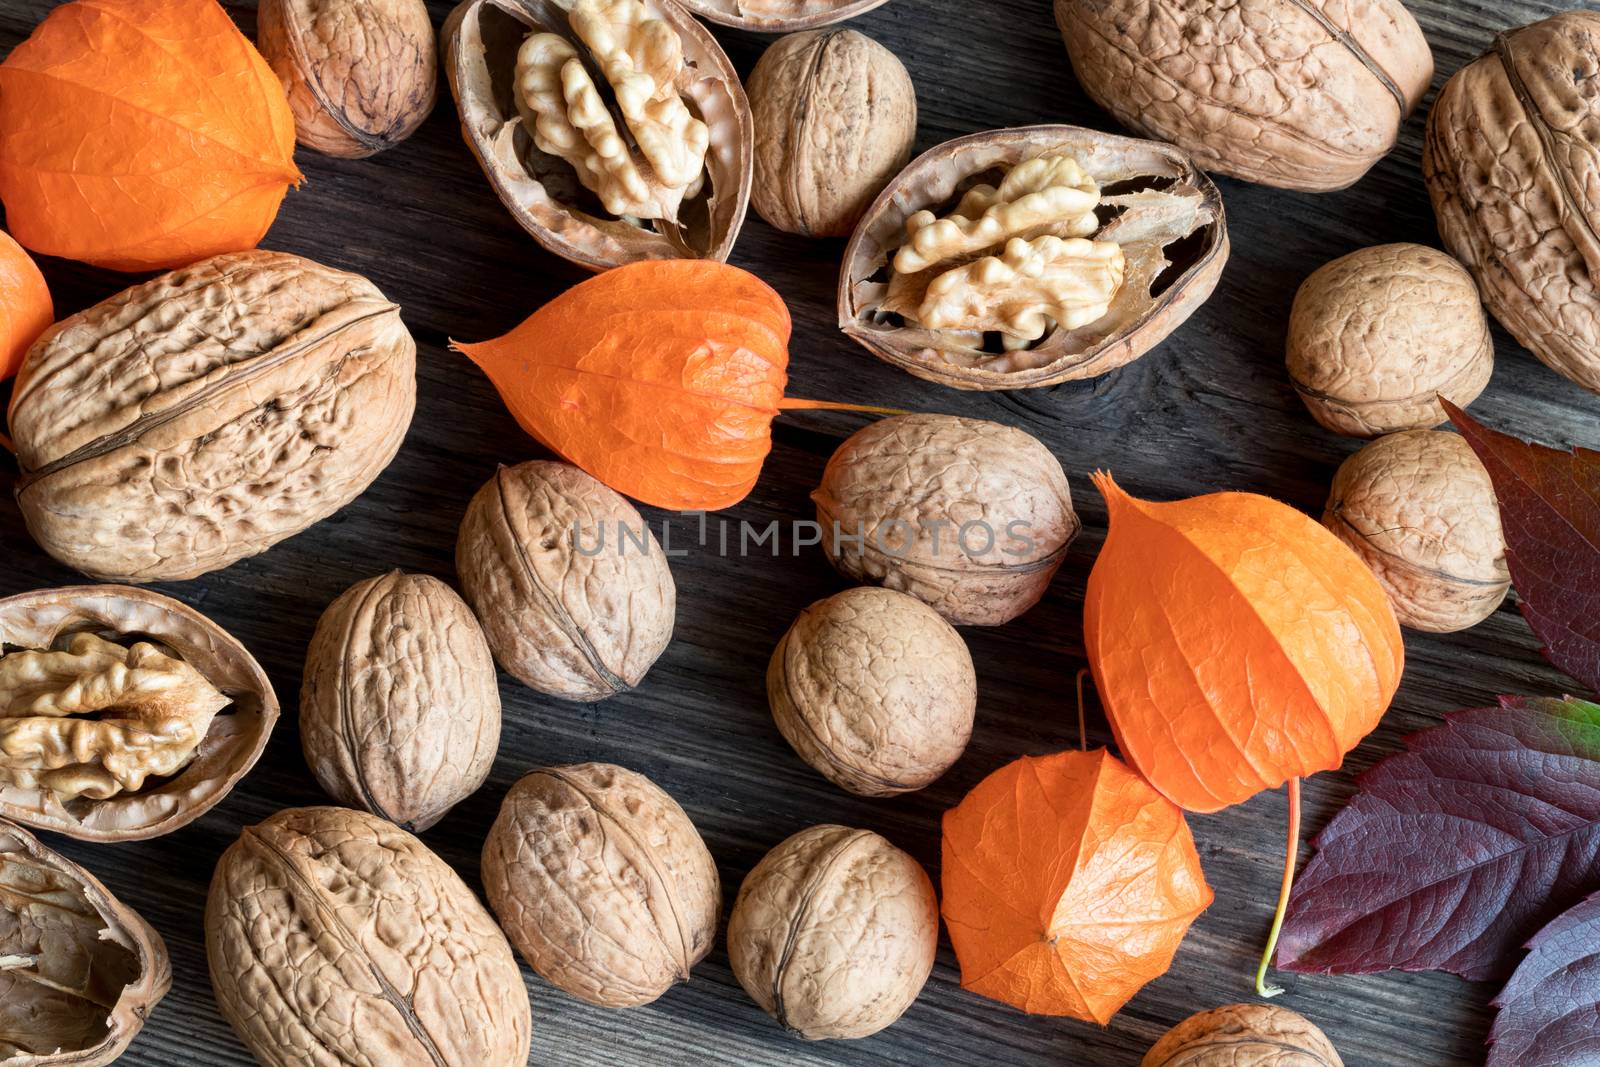 Whole and broken walnuts, Physalis alkekengi (Chinese lantern) and autumn leaves on a wooden background, top view